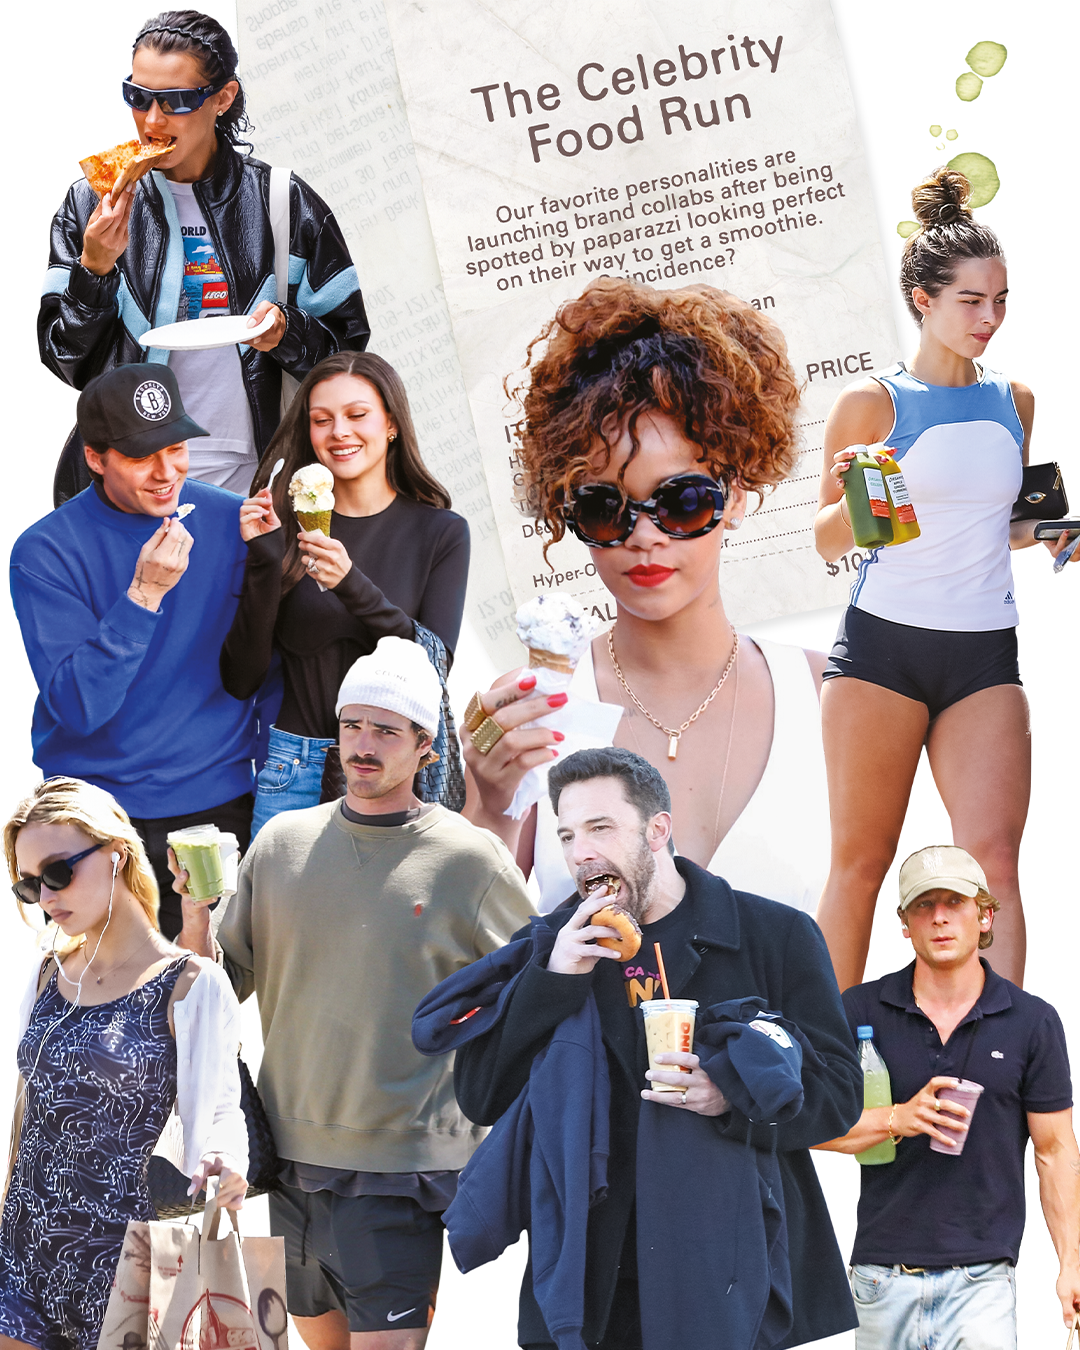 The Art of the Celebrity Food Run